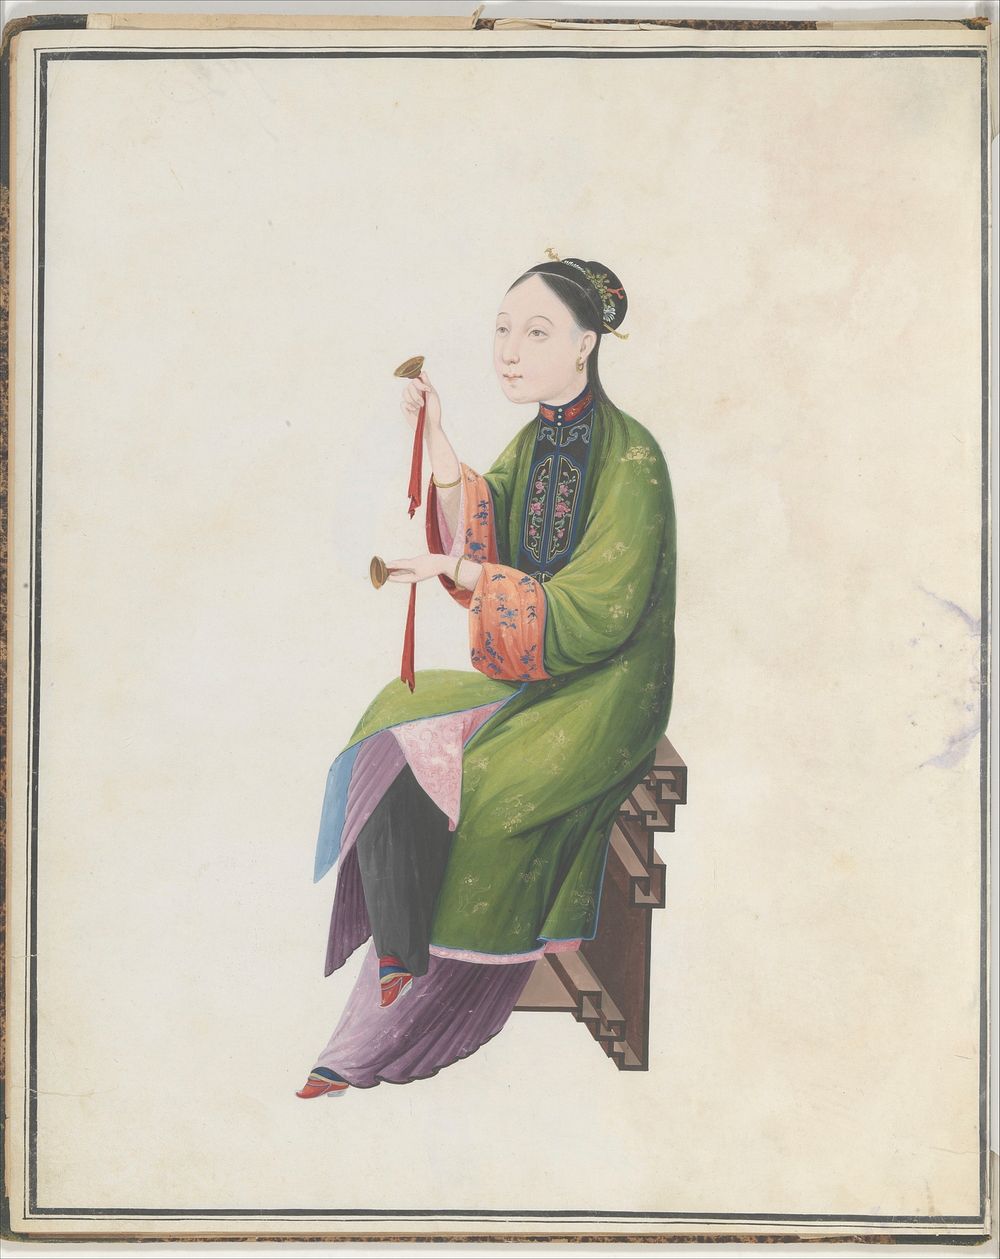 Watercolor of musician playing bo, Chinese